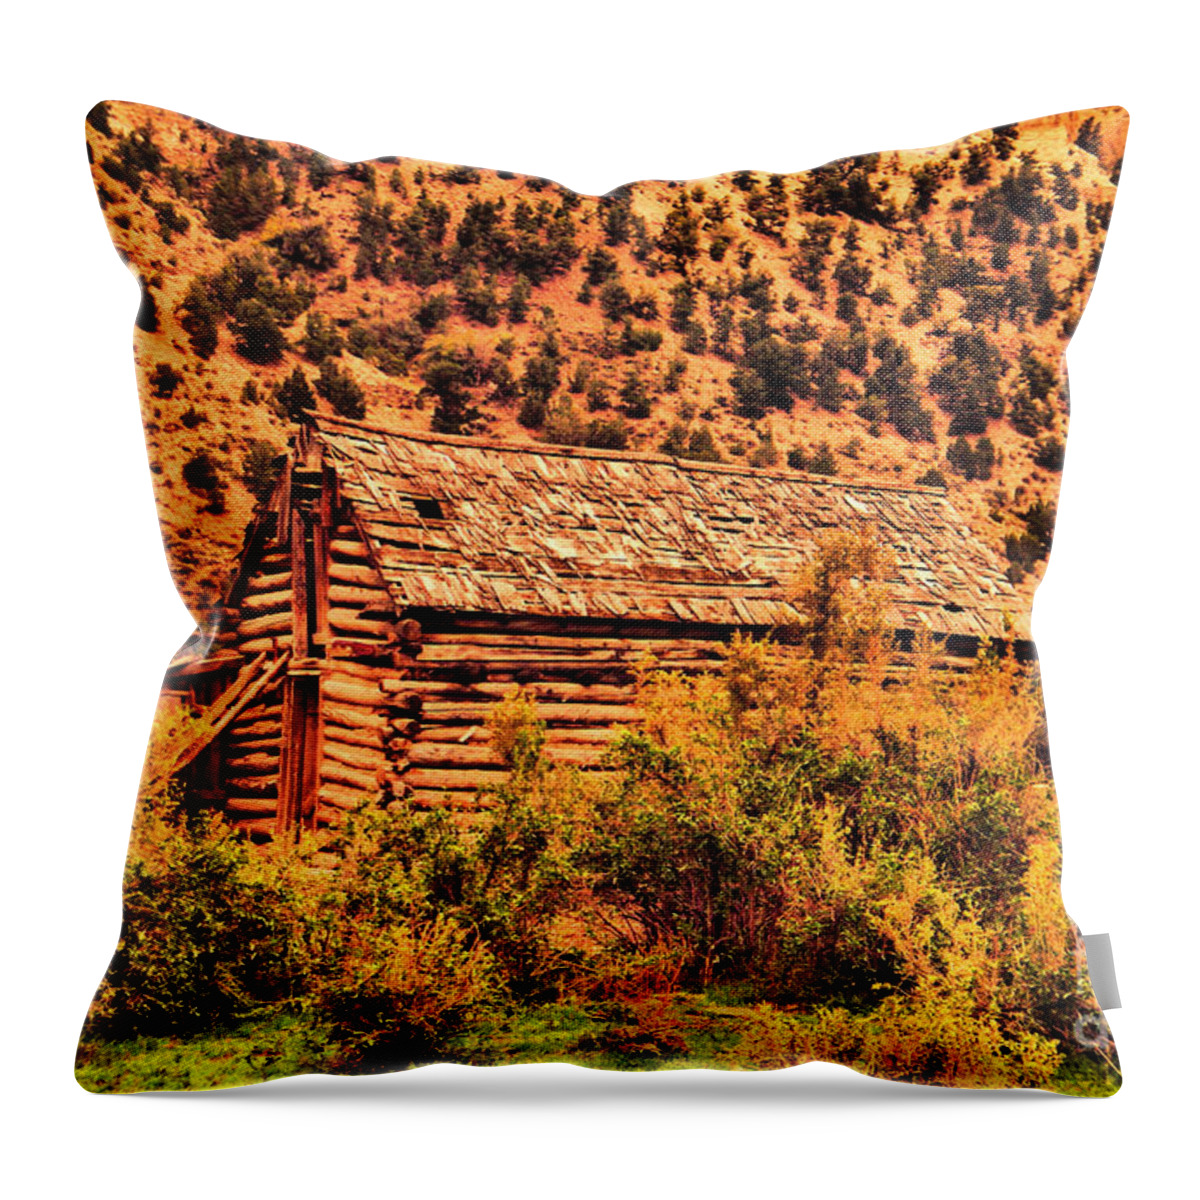 Barn Throw Pillow featuring the photograph Log barn #1 by Jeff Swan